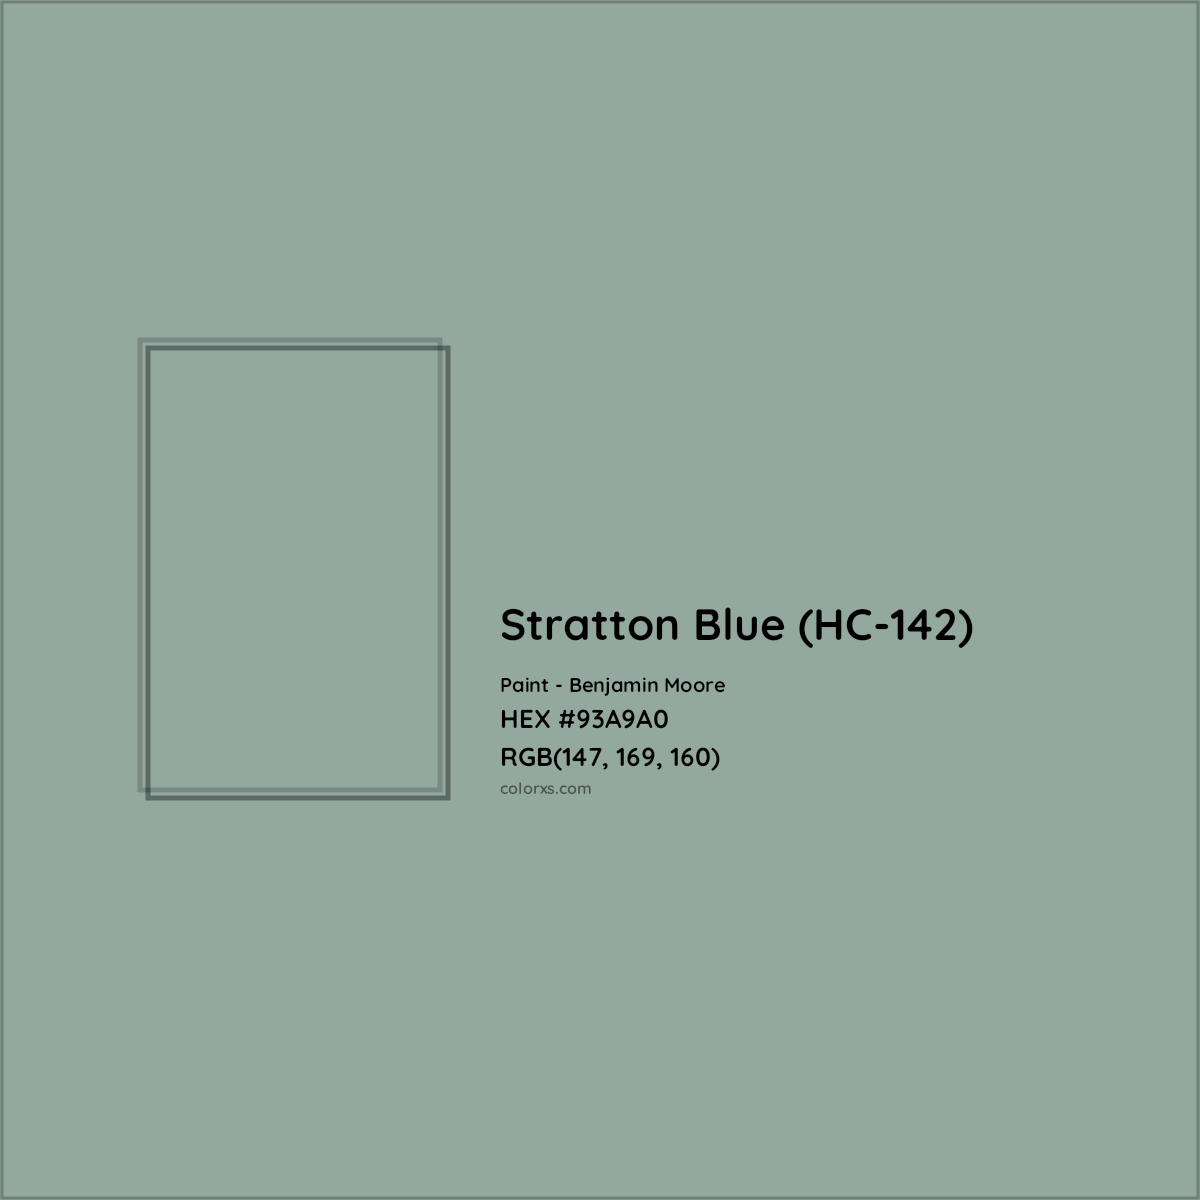 HEX #93A9A0 Stratton Blue (HC-142) Paint Benjamin Moore - Color Code